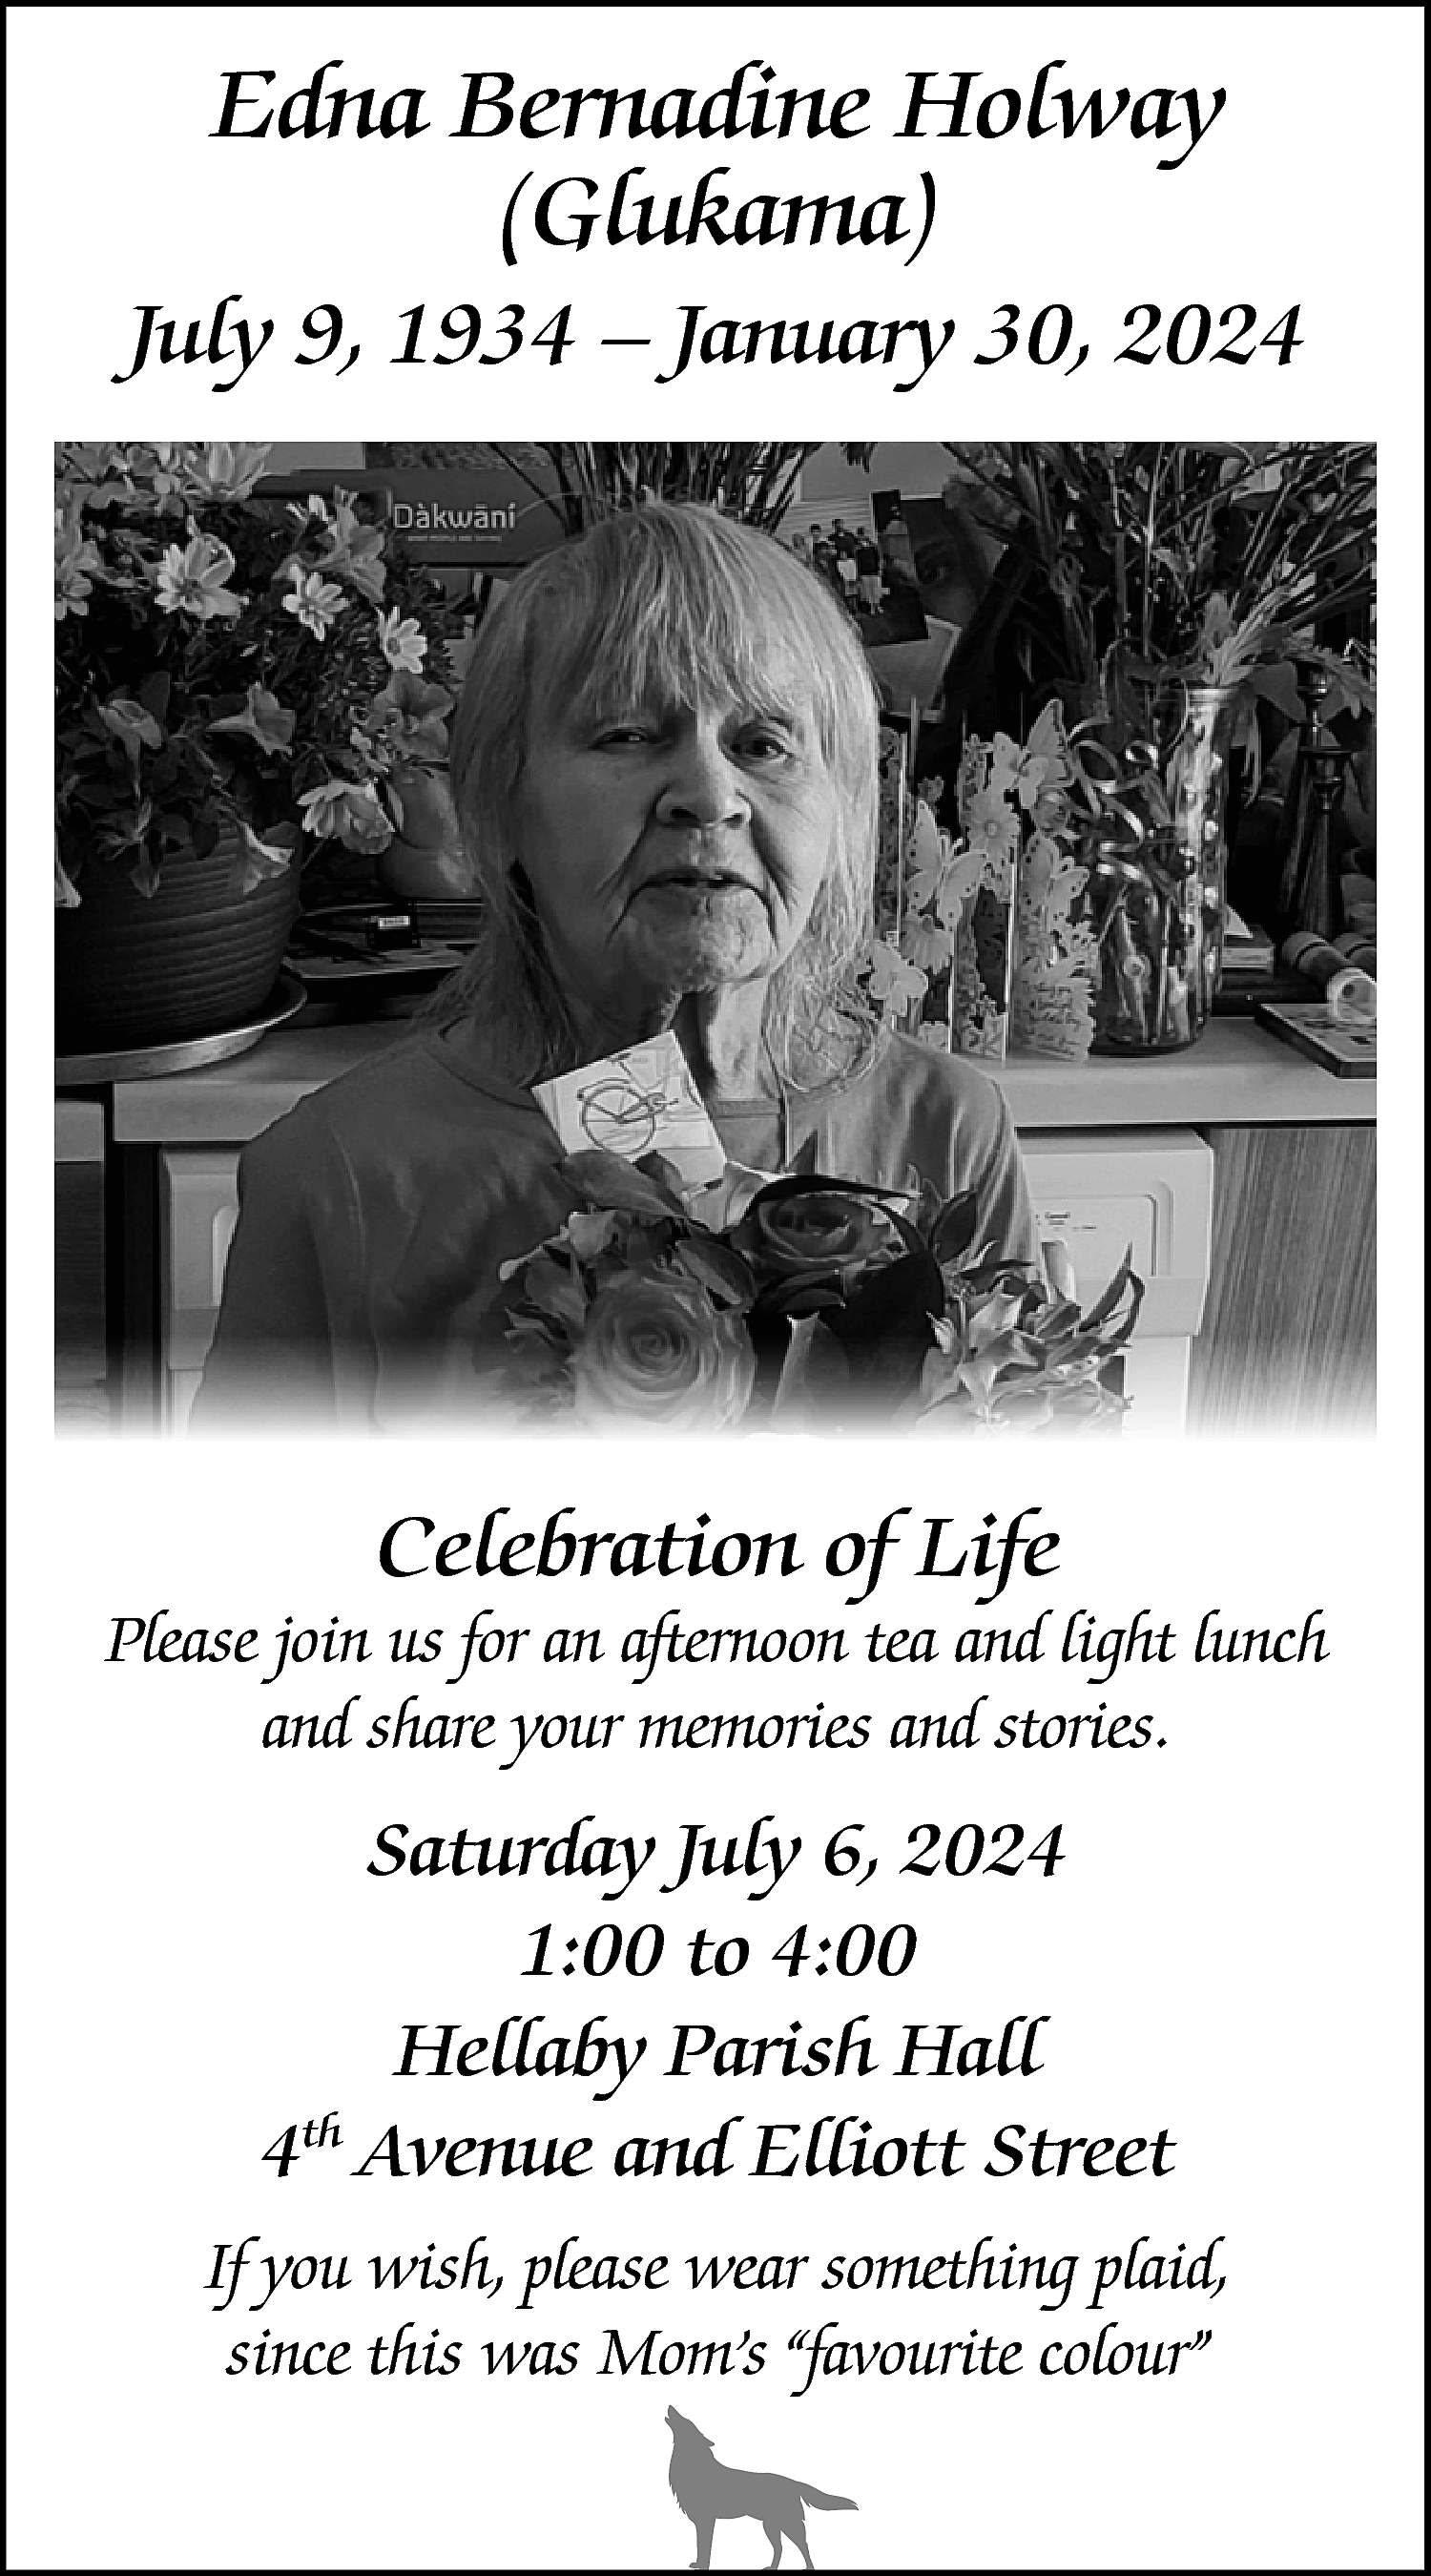 Edna Bernadine Holway <br>(Glukama) <br>  Edna Bernadine Holway  (Glukama)    July 9, 1934 – January 30, 2024    Celebration of Life    Please join us for an afternoon tea and light lunch  and share your memories and stories.    Saturday July 6, 2024  1:00 to 4:00  Hellaby Parish Hall  4th Avenue and Elliott Street  If you wish, please wear something plaid,  since this was Mom’s “favourite colour”    